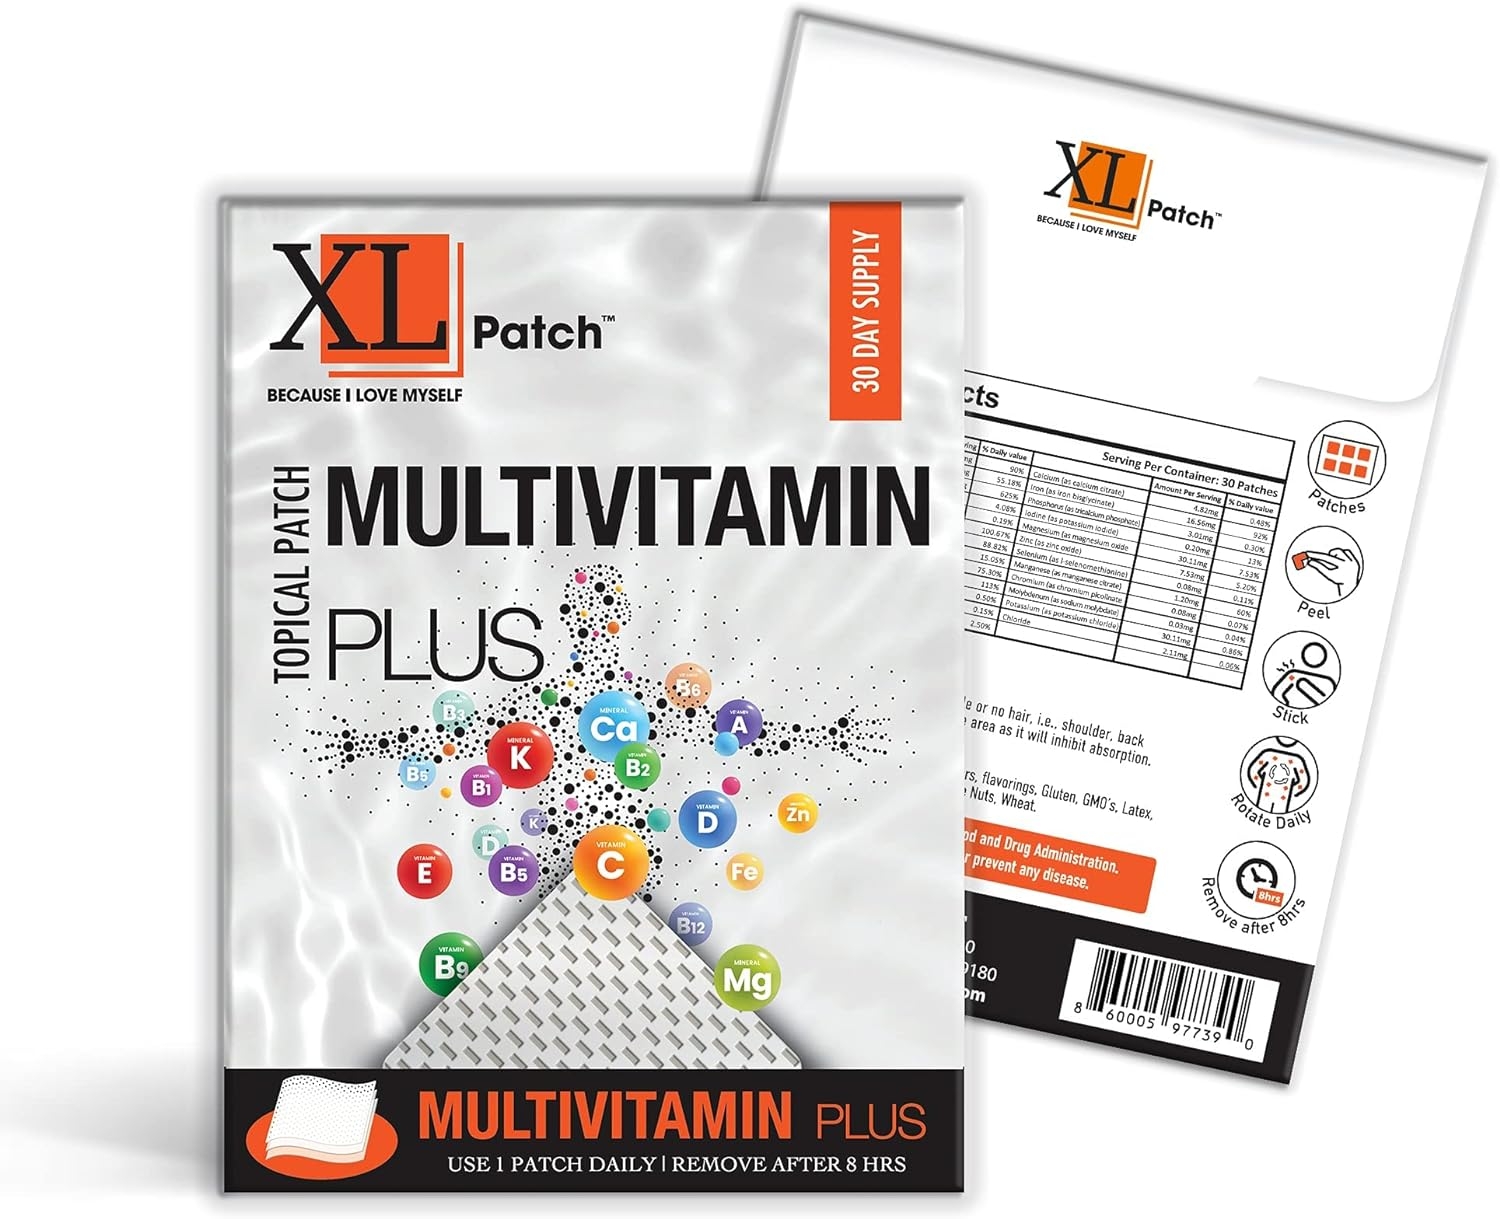 Multi-Nutrients Plus Patch by XLPatch 2 Pack (60-Day Supply)